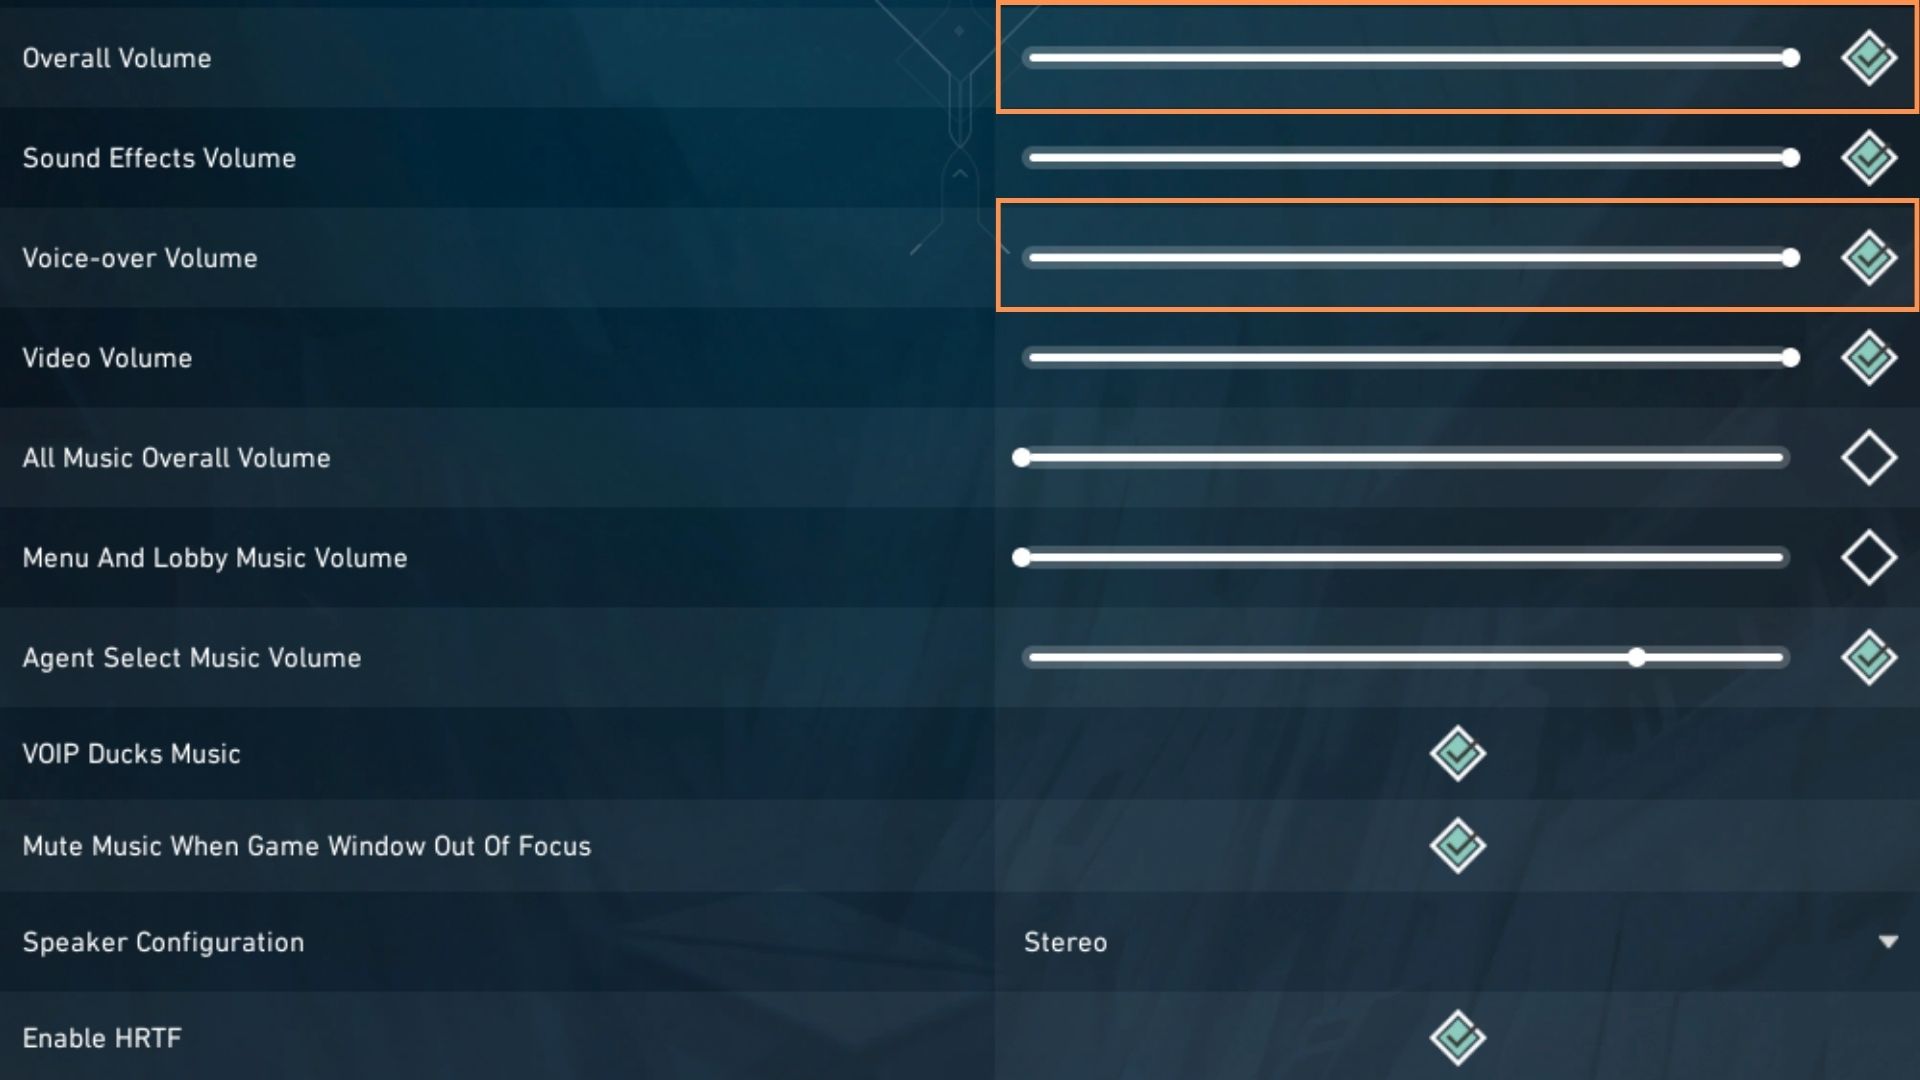 A screenshot showing the audio settings in Valorant